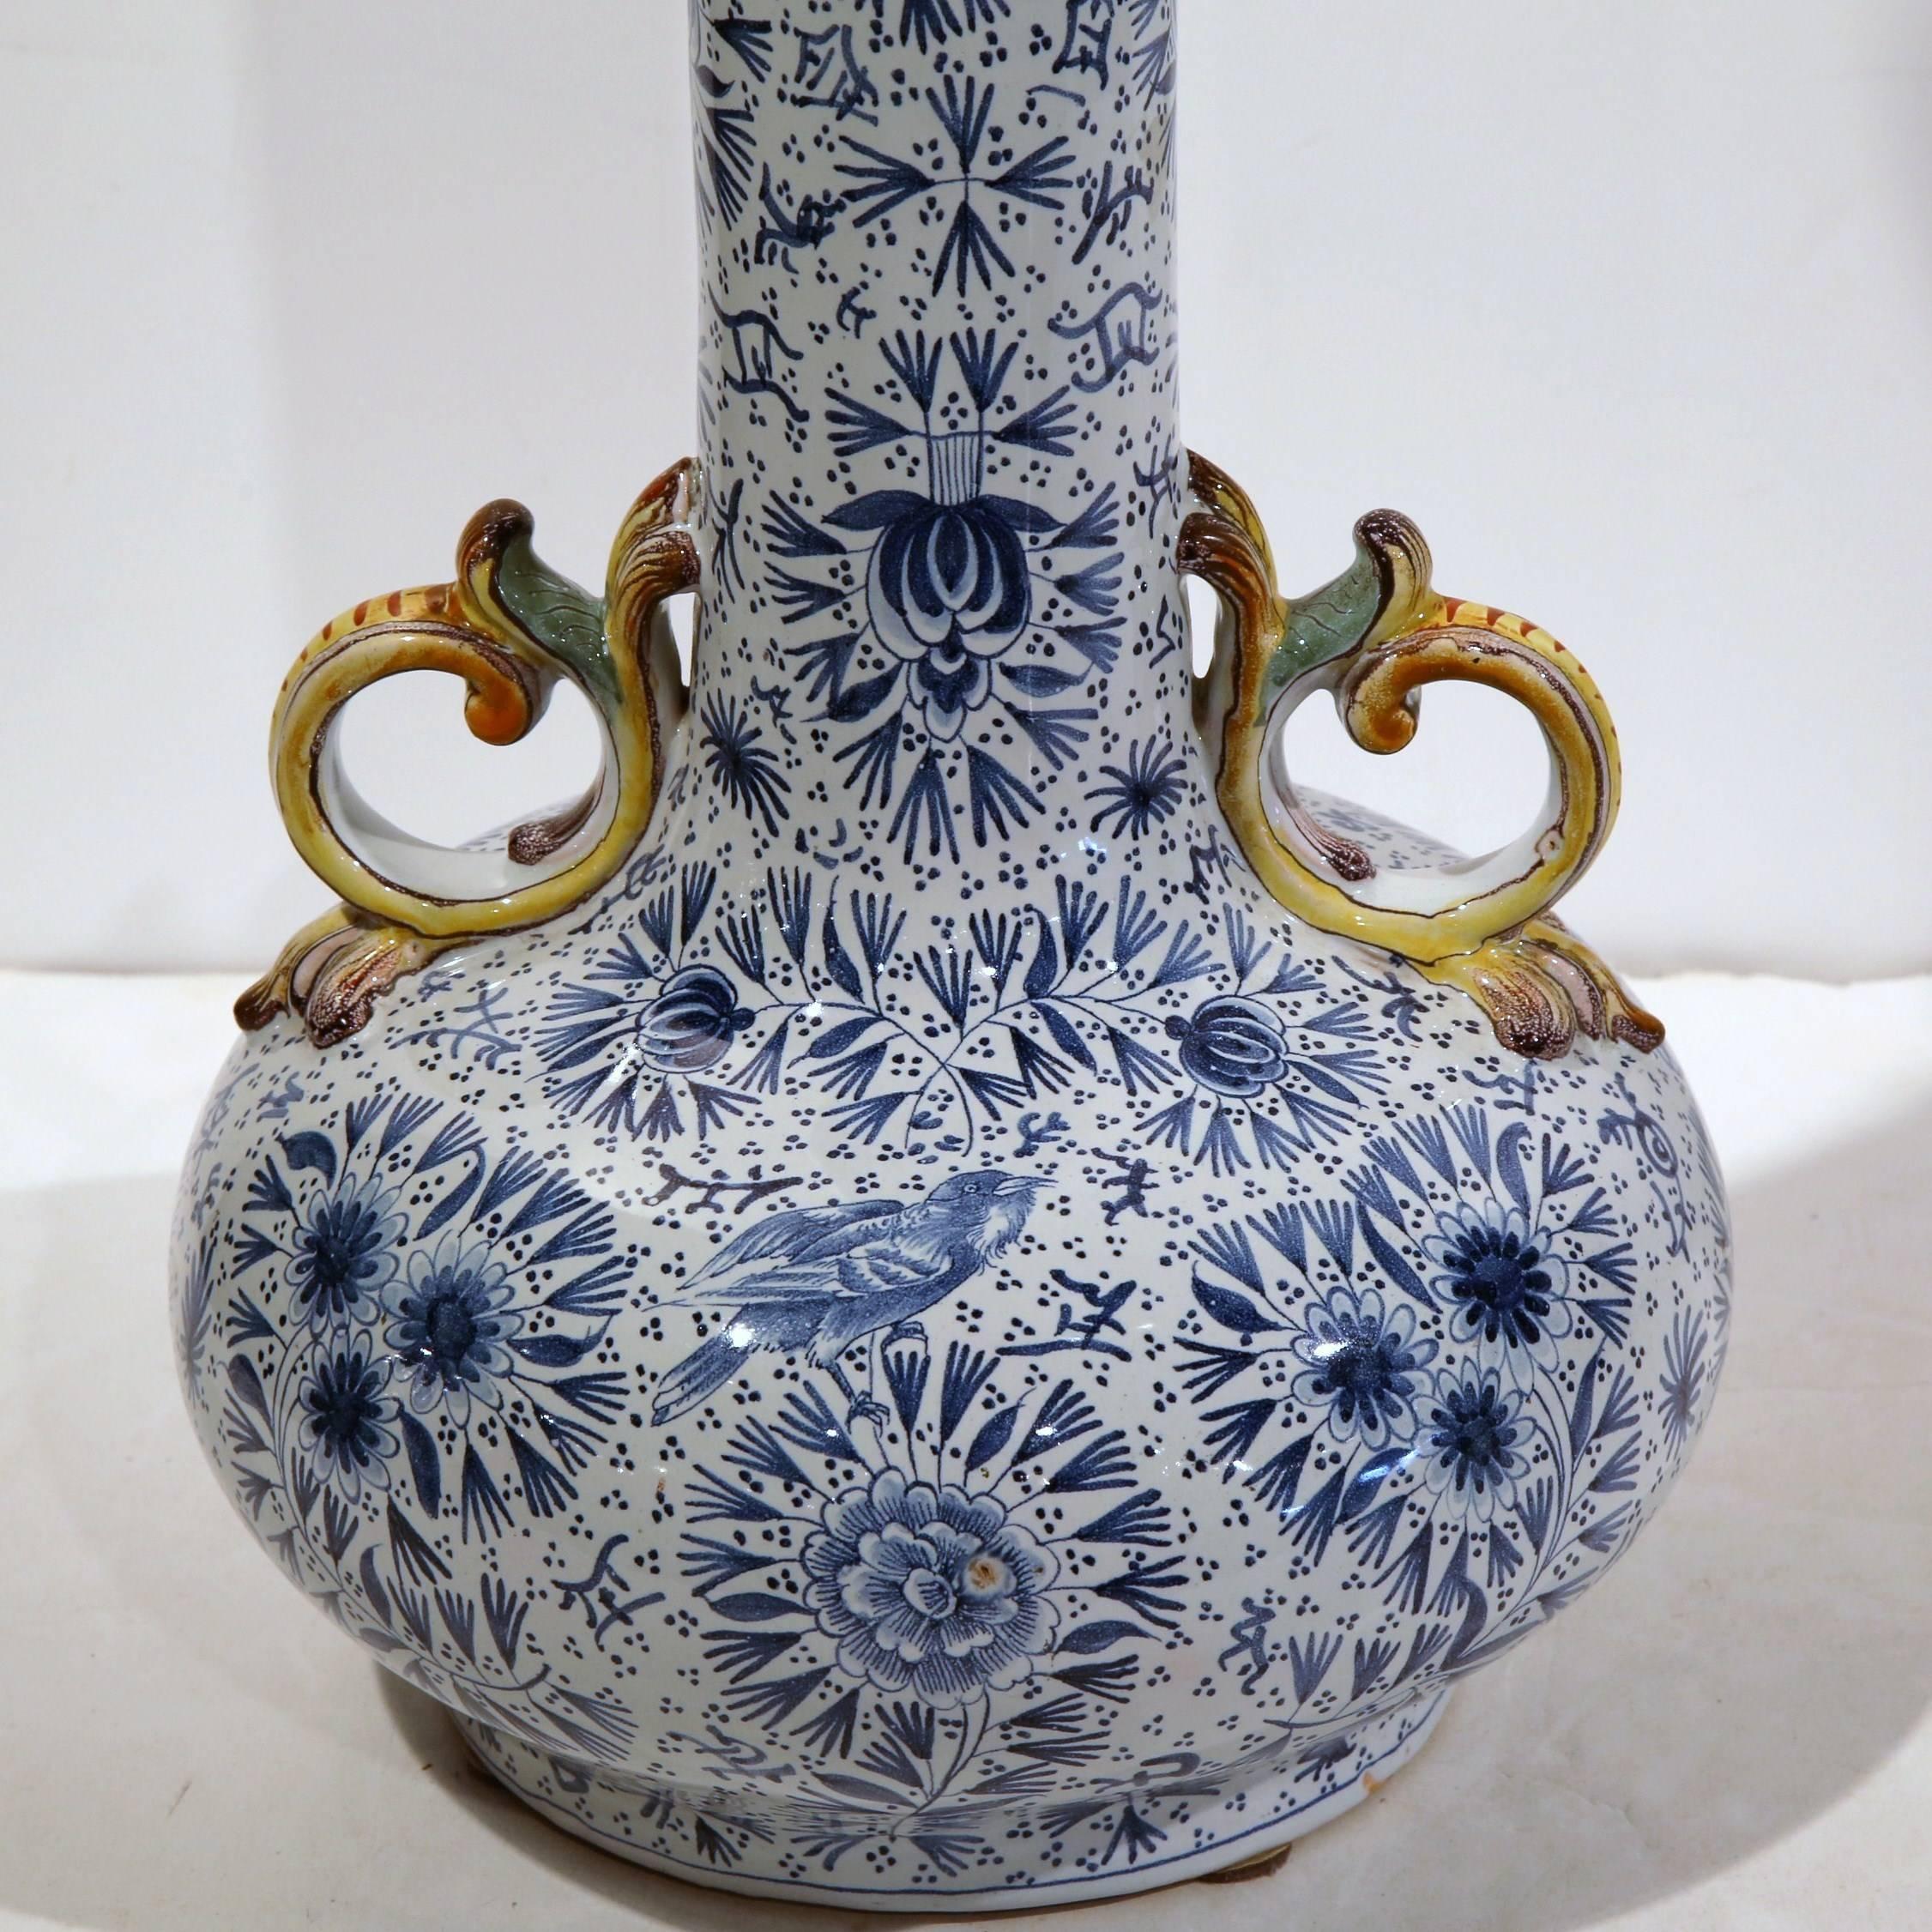 This elegant, antique vase was created in Luneville, France, circa 1870. The tall, thin vase has a Classic blue and white palette and is decorated with natural motifs including birds and flowers. The long neck is flanked by yellow dolphin handles at